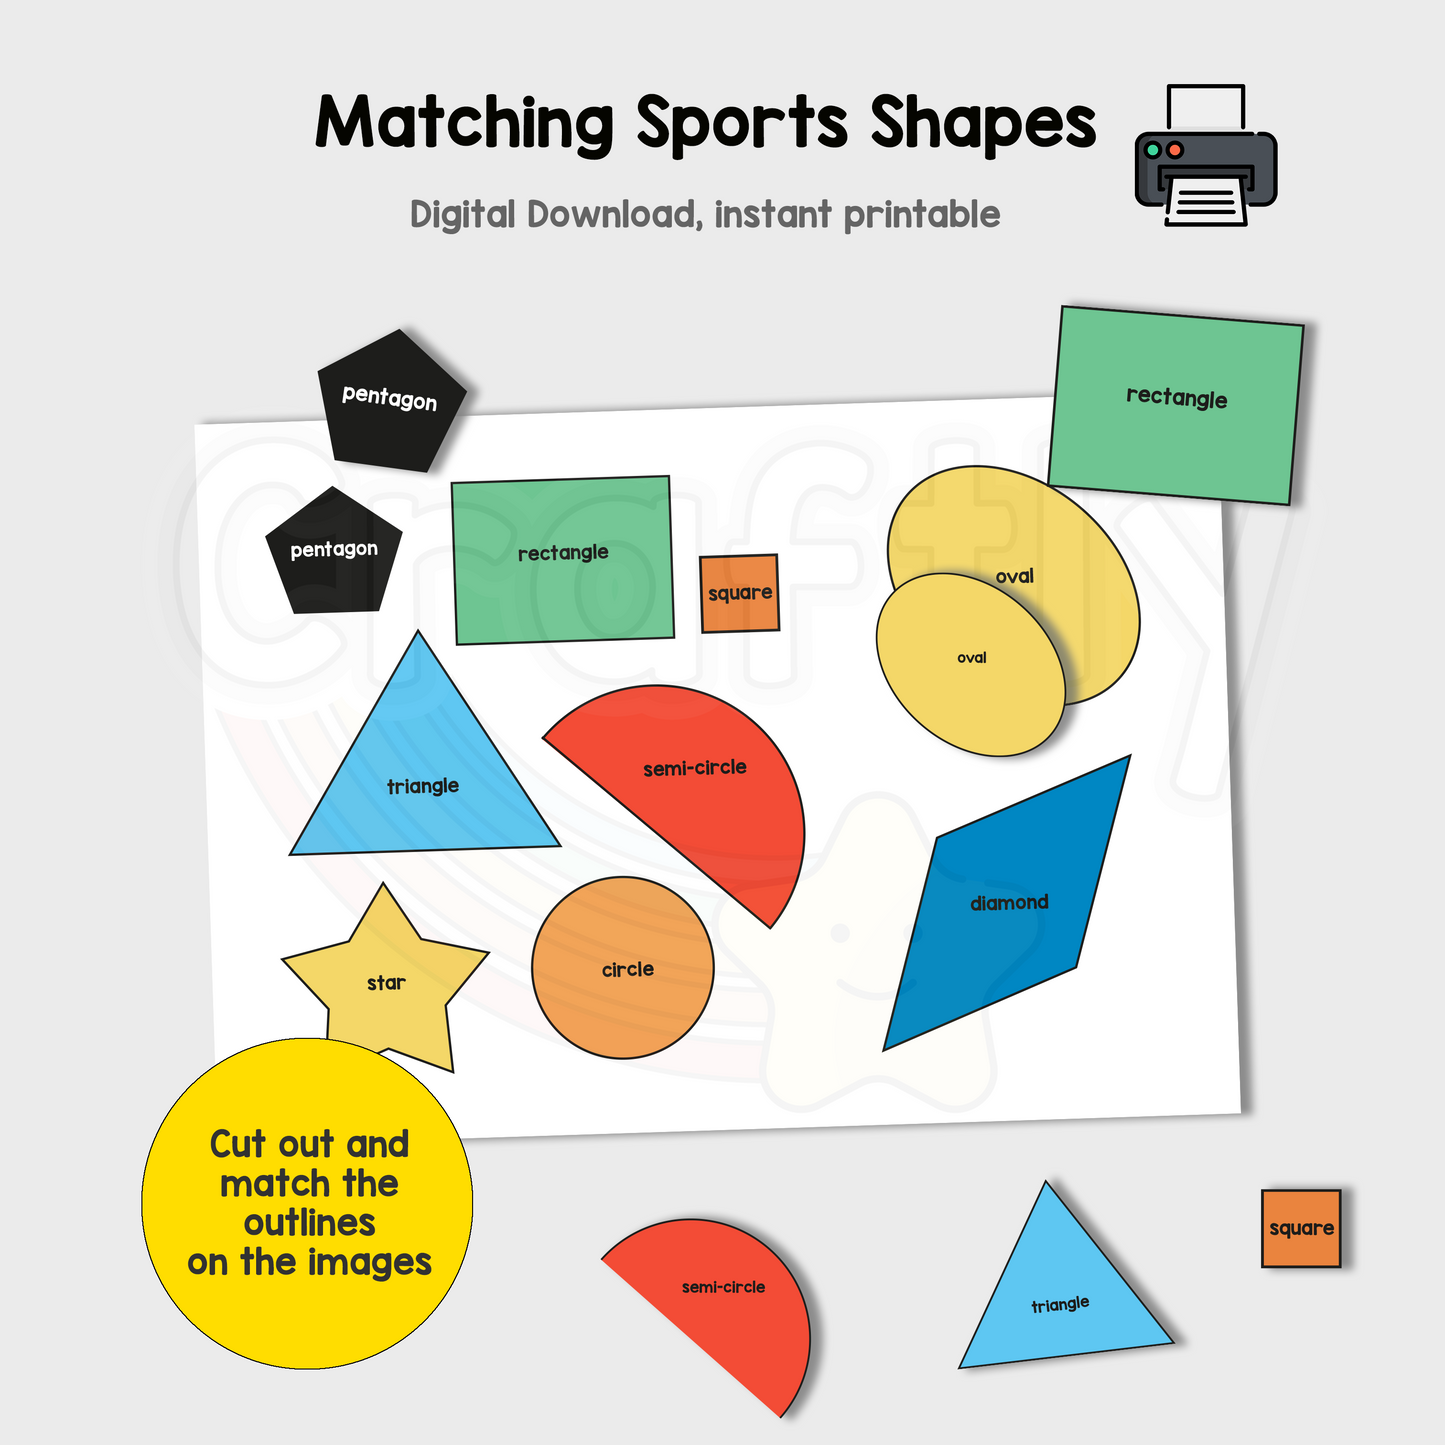 Matching Shapes in Sports